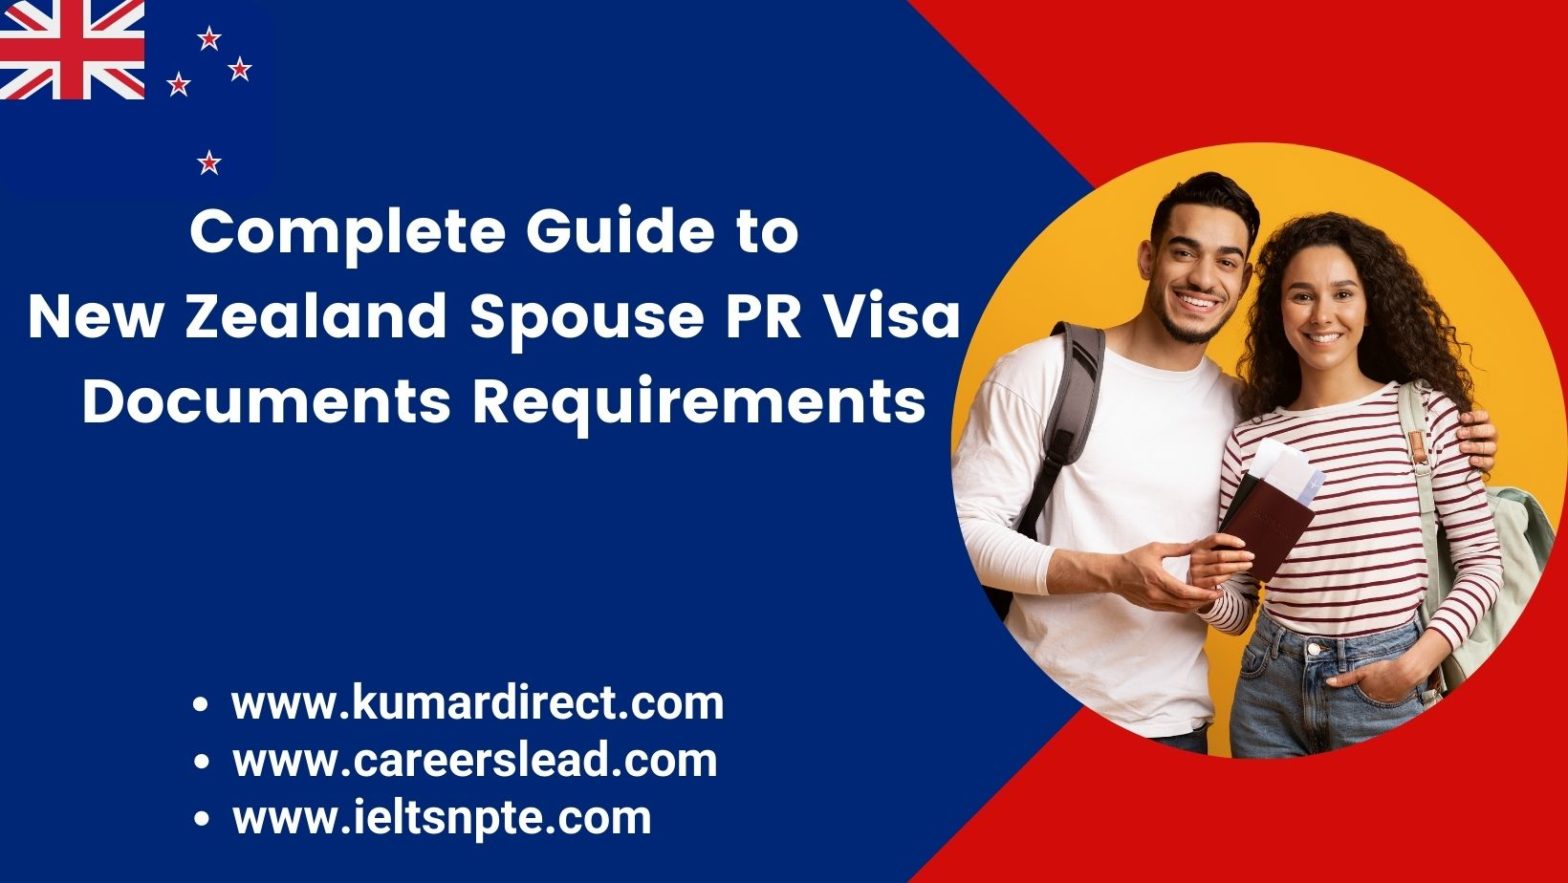 Complete Guide to New Zealand Spouse PR Visa Documents Requirements